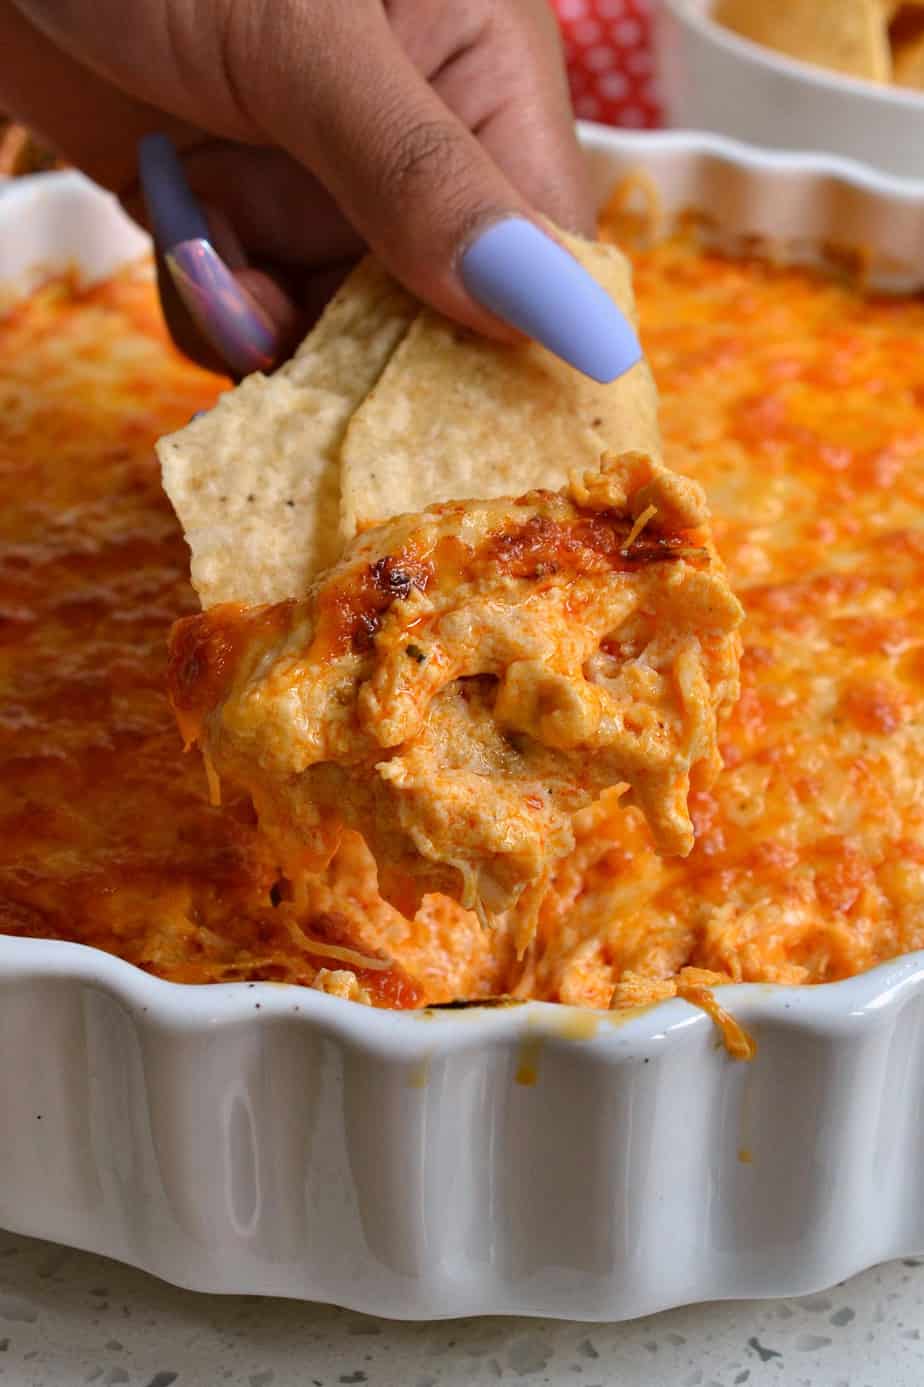 Buffalo Chicken Dip dip is the ultimate hot creamy cheesy dip with all the classic flavors of hot buffalo chicken wings.